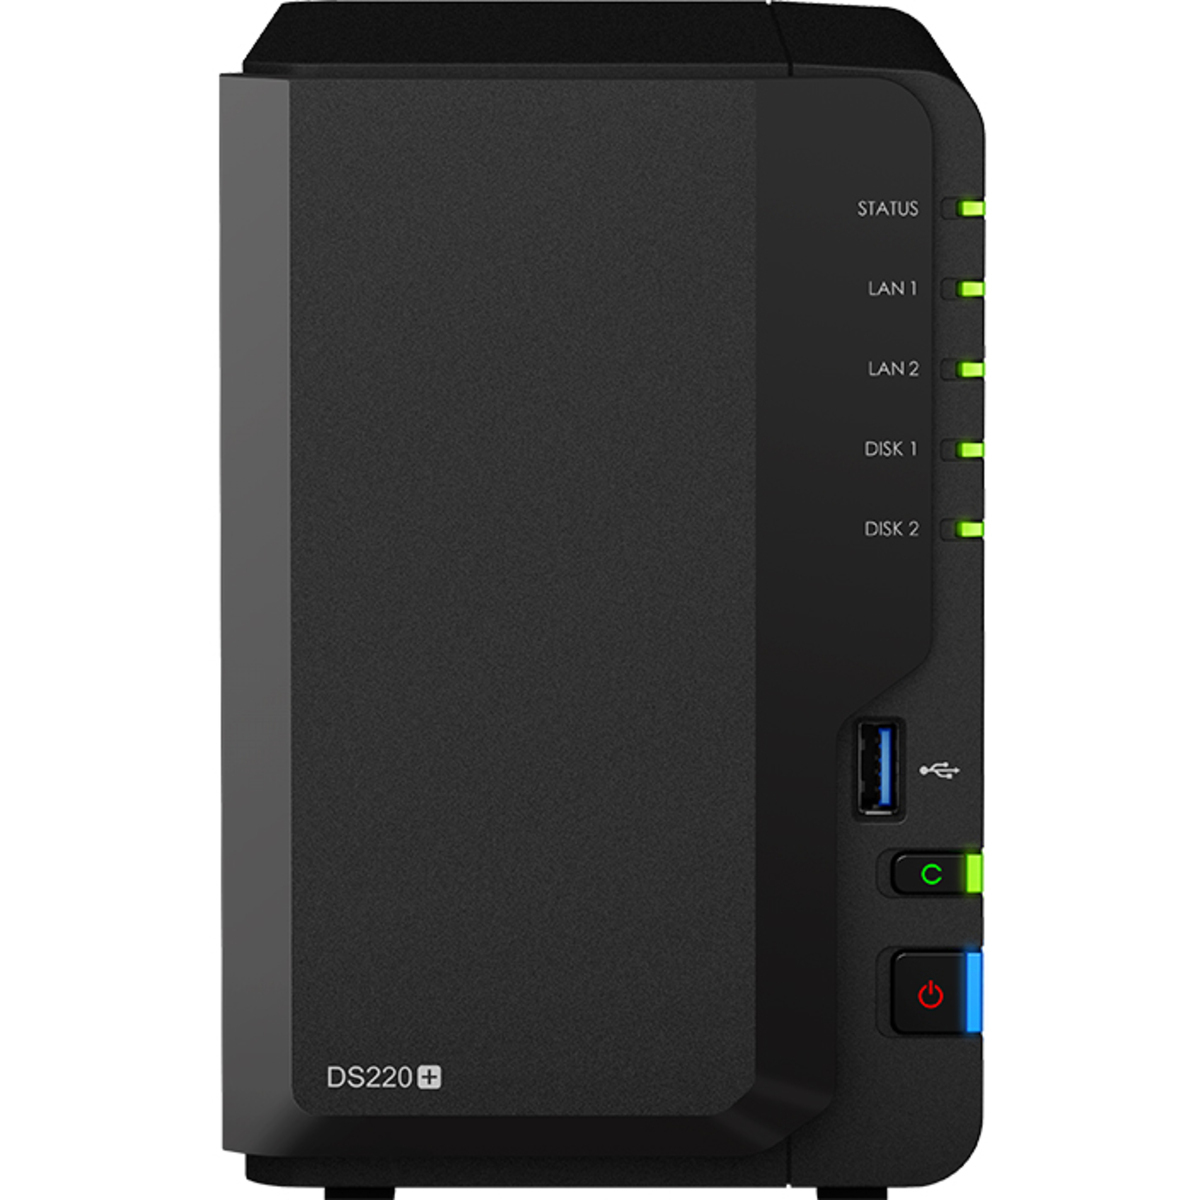 buy $605 Synology DiskStation DS220+ 2tb Desktop NAS - Network Attached Storage Device 2x1000gb Samsung 870 QVO MZ-77Q1T0 2.5 SATA 6Gb/s SSD CONSUMER Class Drives Installed - Burn-In Tested - FREE RAM UPGRADE - nas headquarters buy network attached storage server device das new raid-5 free shipping usa DiskStation DS220+